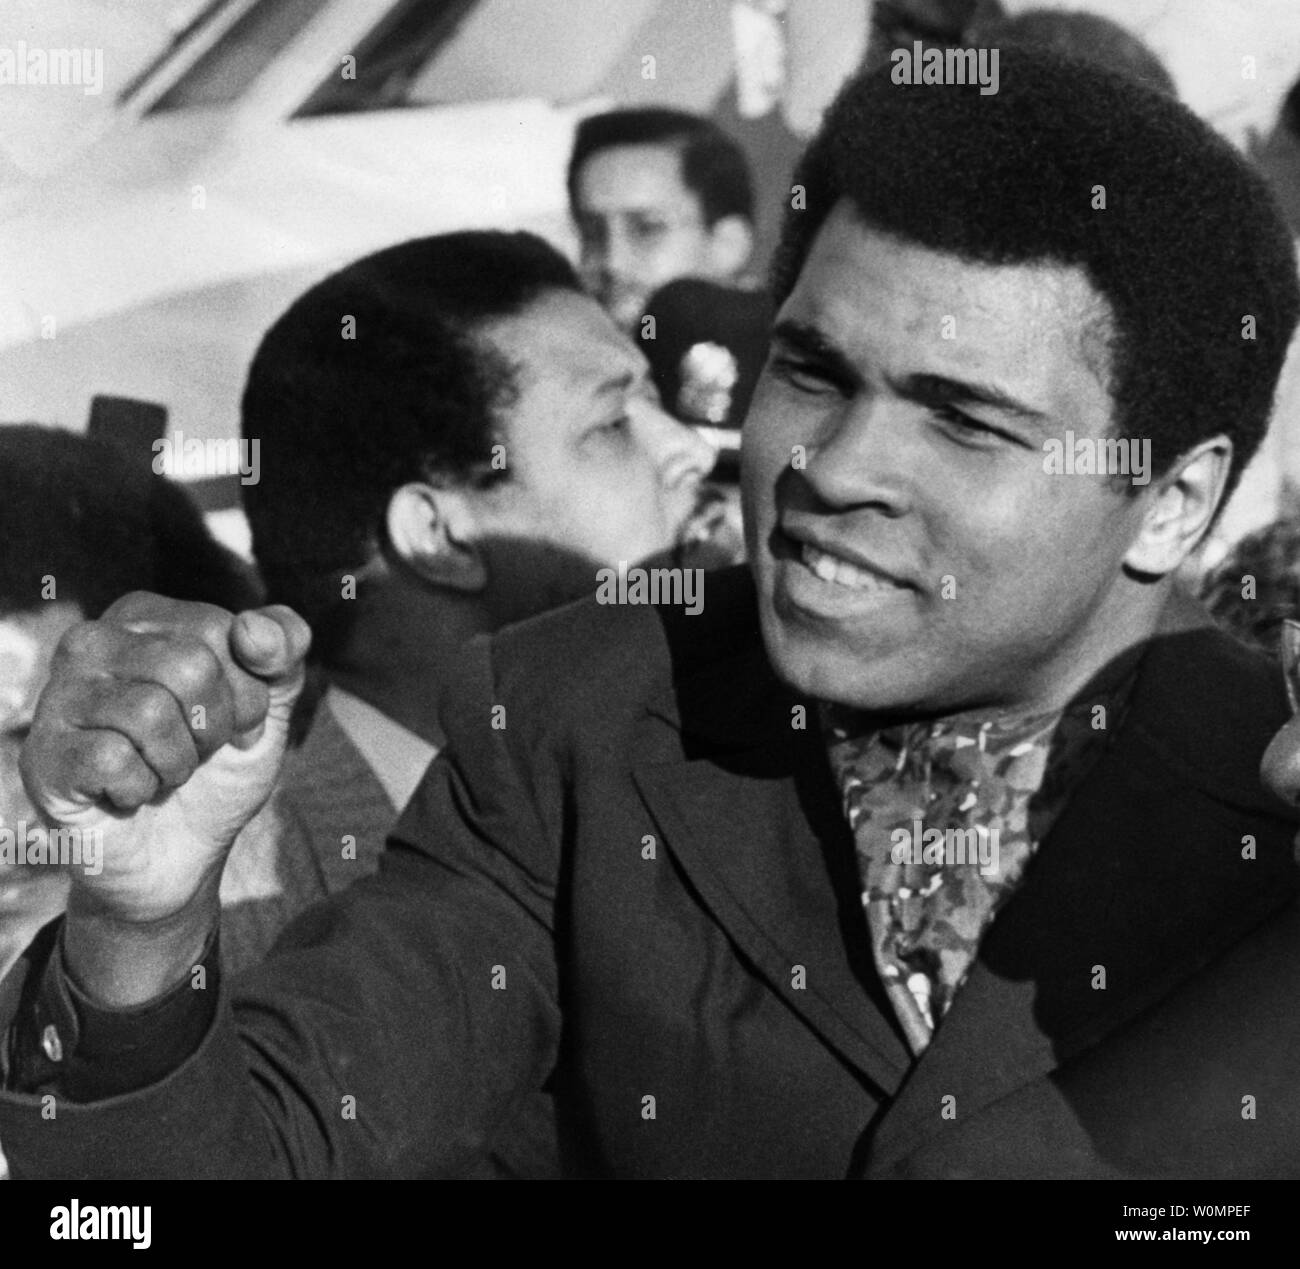 Boxing great Muhammad Ali died at the age of 74 in Phoenix, Arizona on Saturday, June 4, 2016.  He is shown  acknowledging cheers of the crowd at Chicago's Midway Airport on November 1, 1974, after his arrival from Zaire, Africa, where he beat George Foreman to regain his world heavyweight boxing title.   File Photo by Ray Foli/UPI Stock Photo